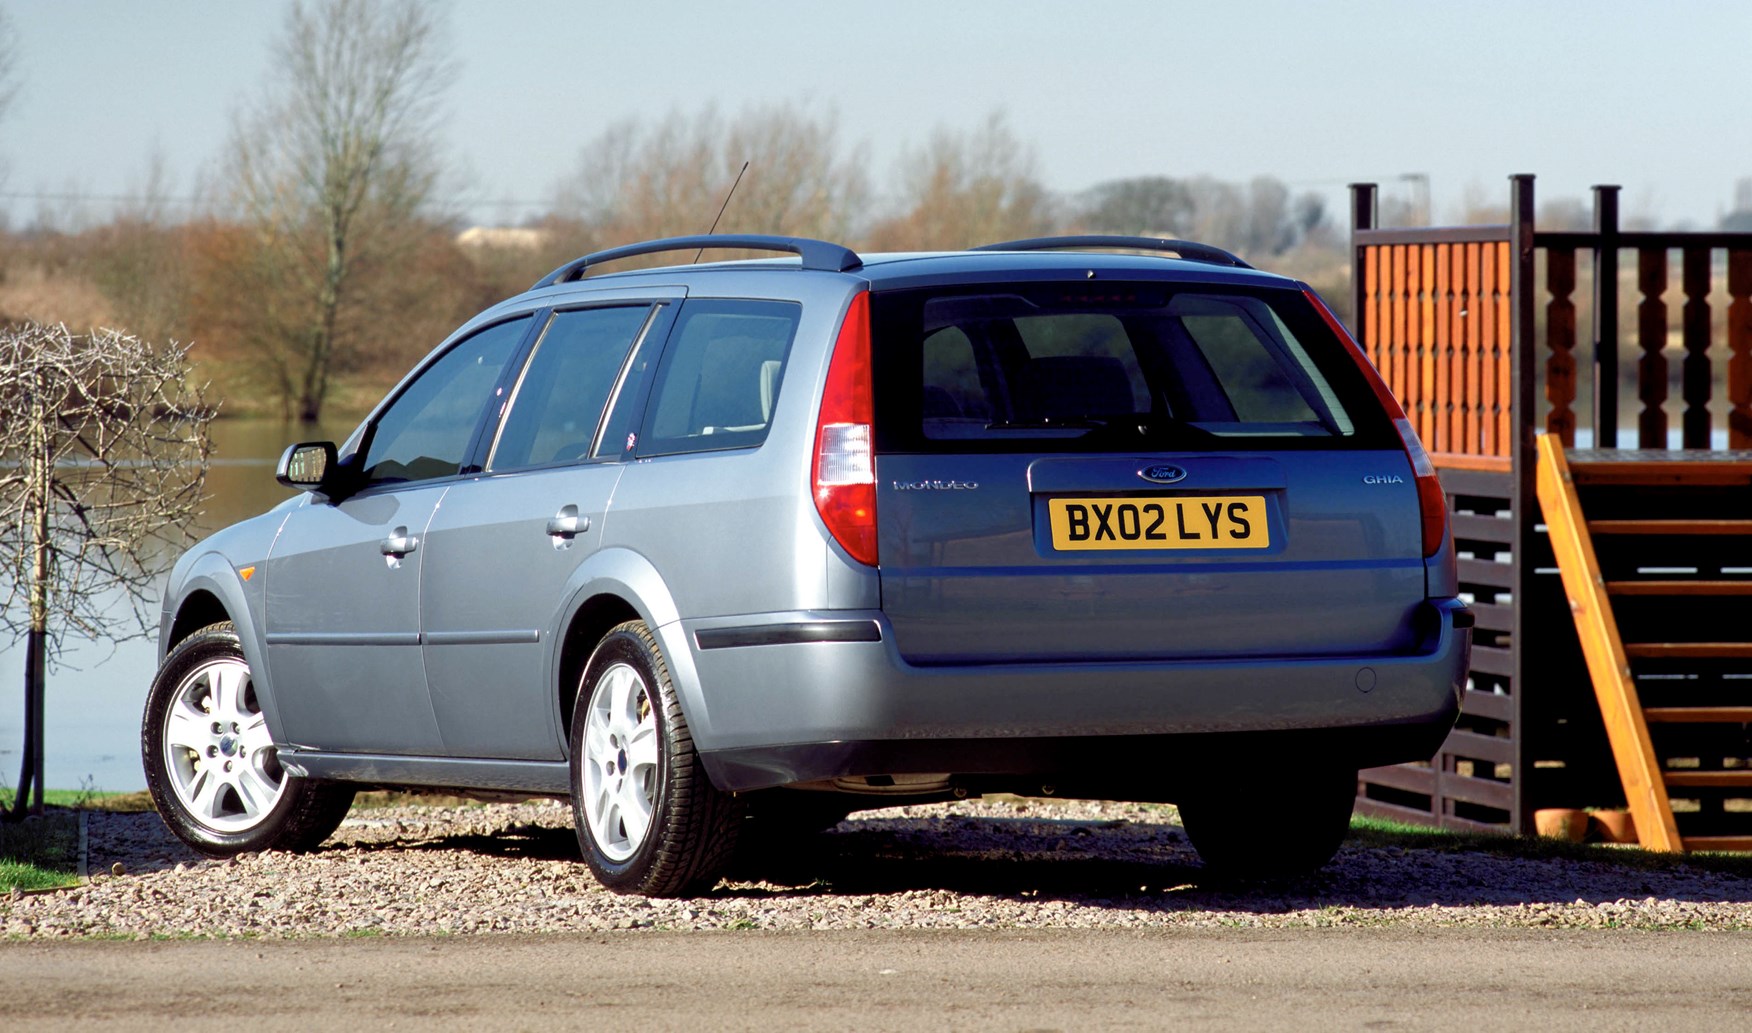 Used Ford Mondeo Estate (2000 - 2007) Review | Parkers